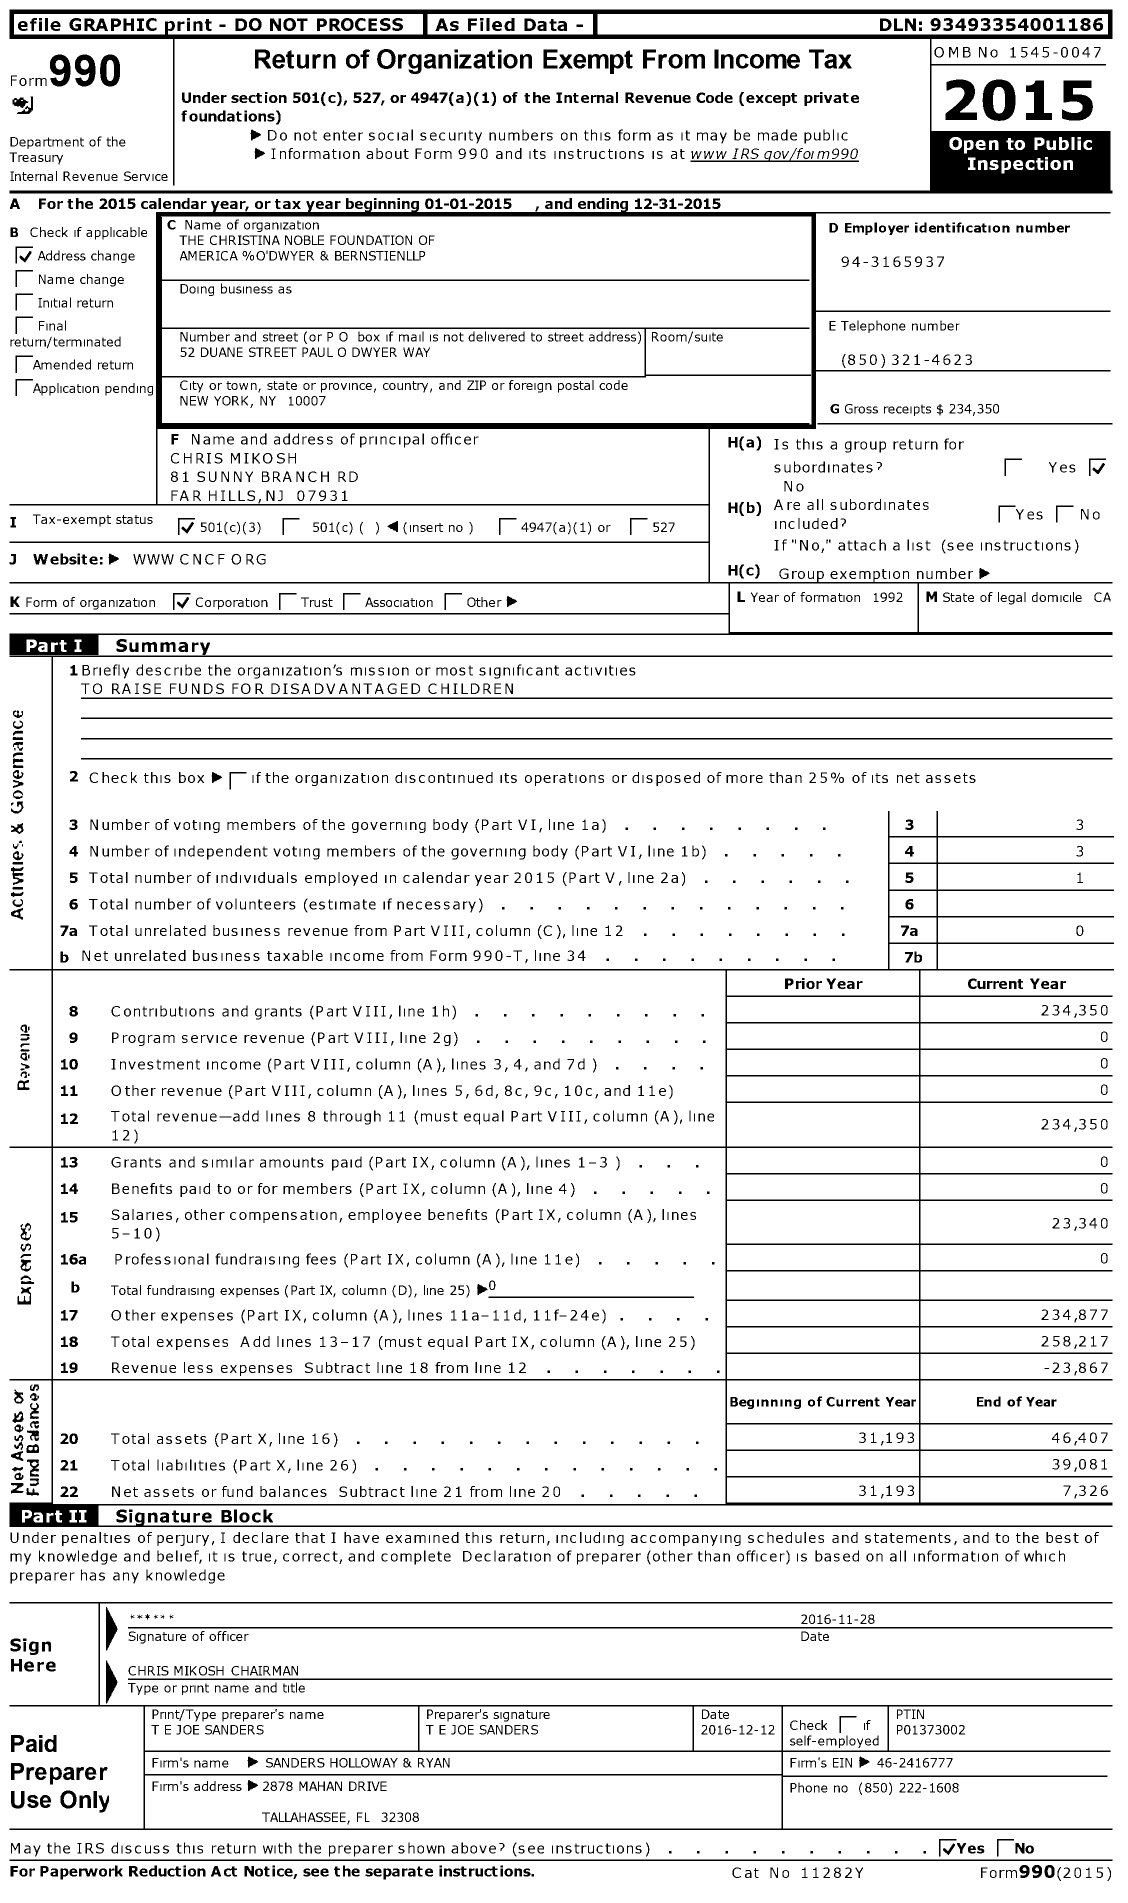 Image of first page of 2015 Form 990 for The Christina Noble Foundation of America